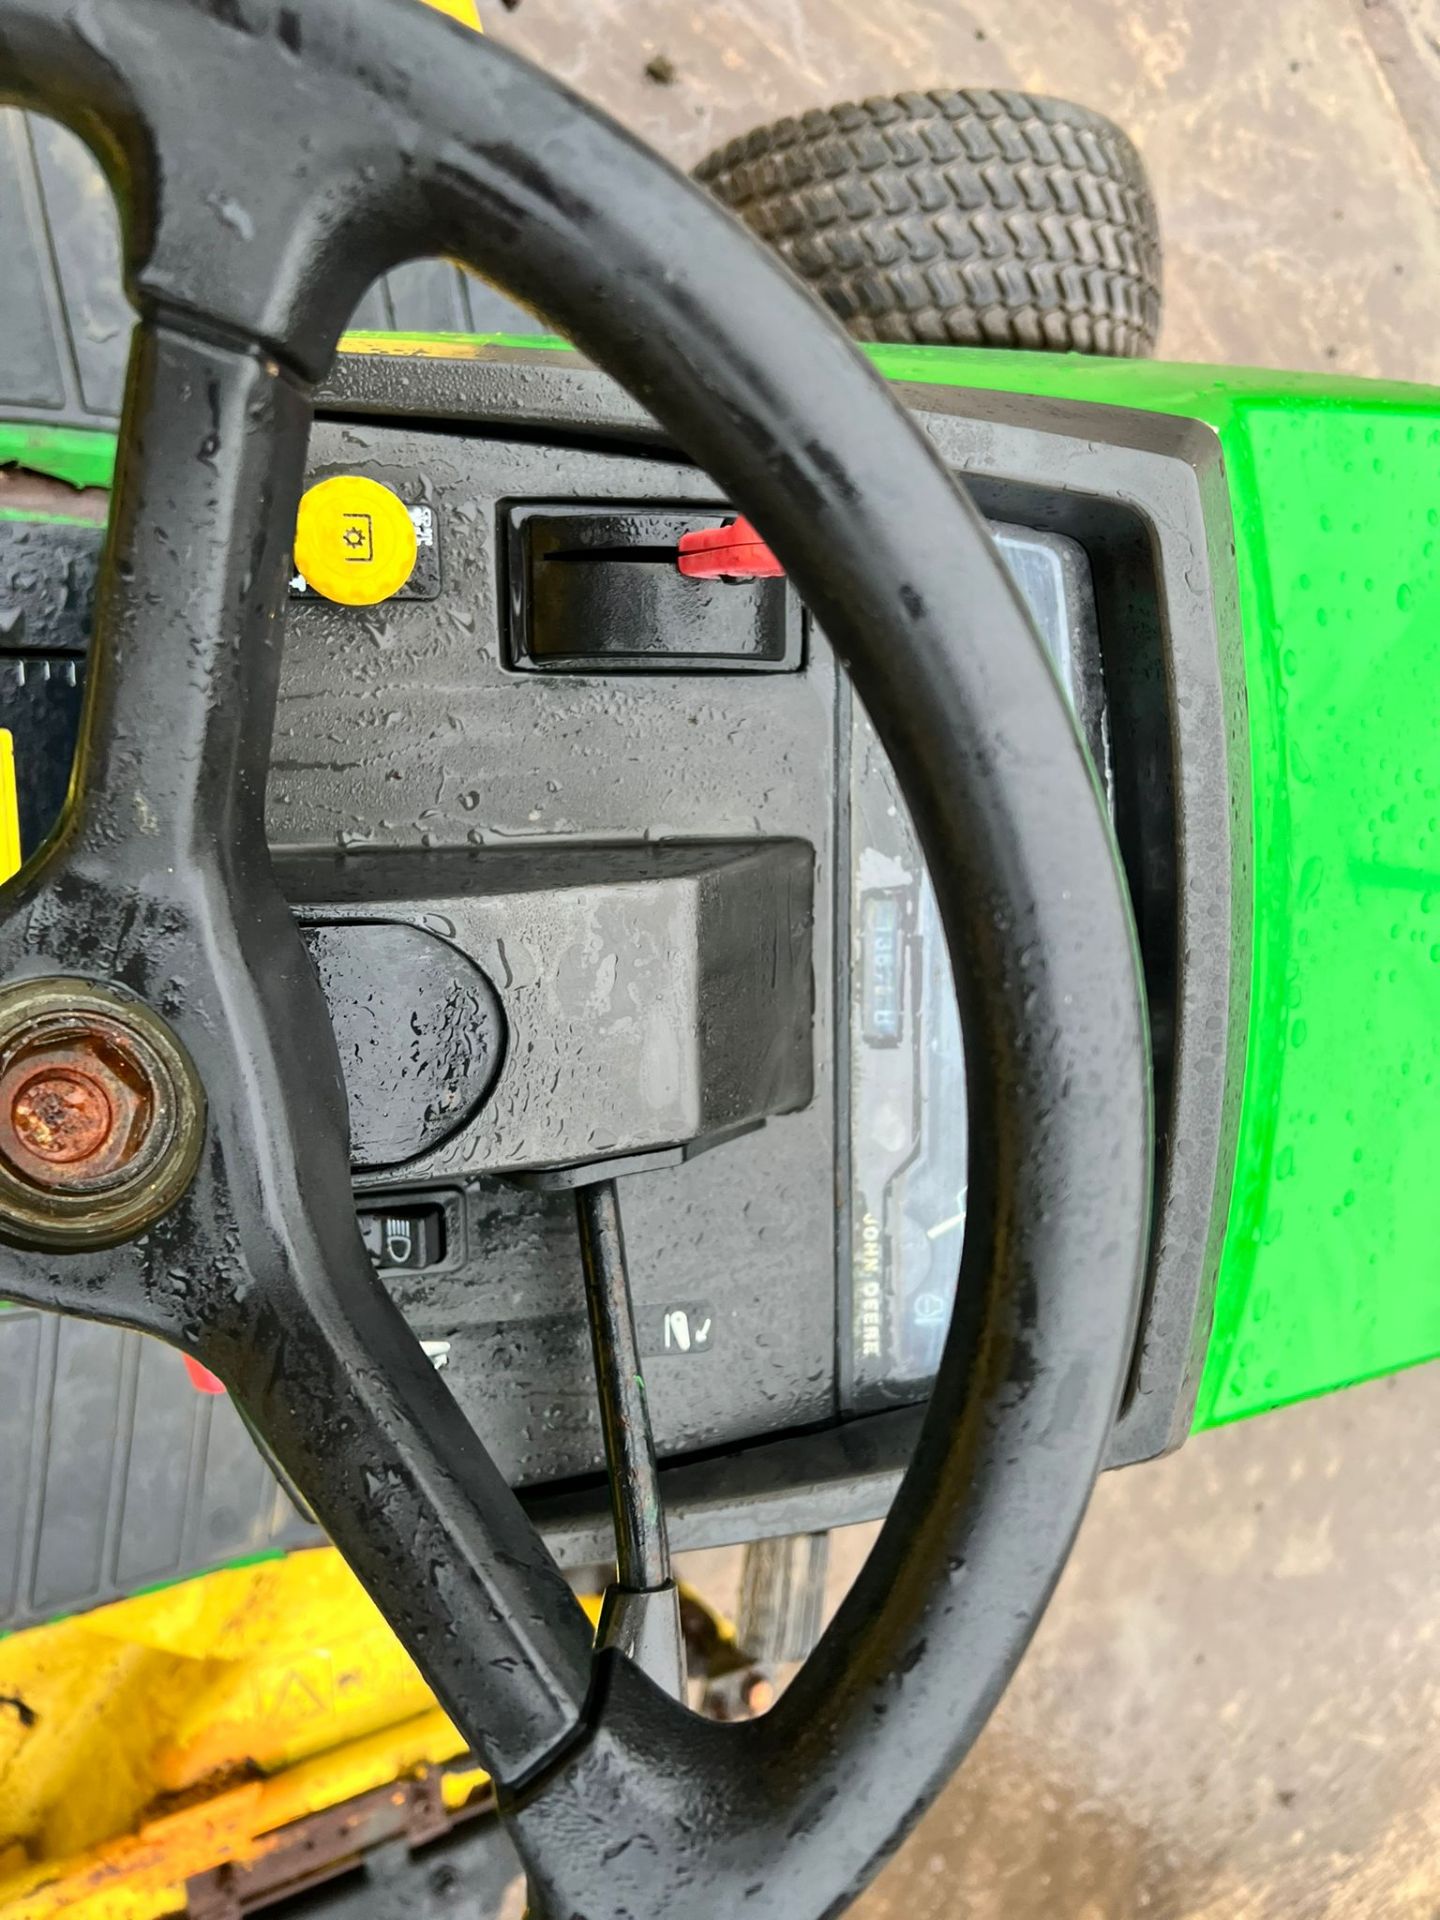 JOHN DEERE 455 22hp DIESEL RIDE ON MOWER WITH CLAMSHELL COLLECTOR, RUNS DRIVES AND CUTS *PLUS VAT* - Image 10 of 11